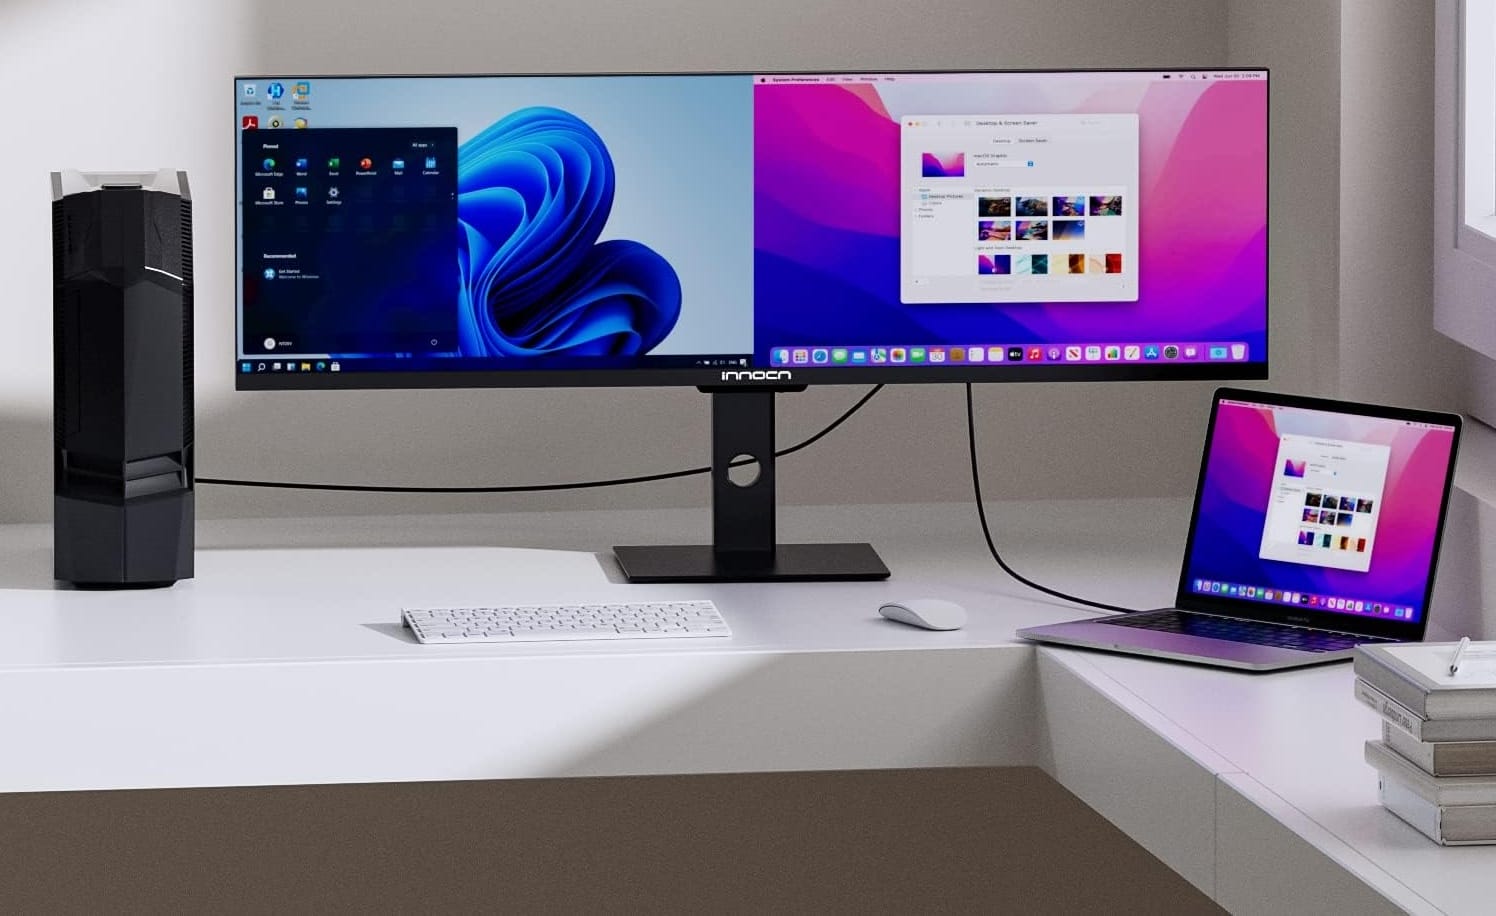 INNOCN 44C1G Review  An ultrawide productivity monitor